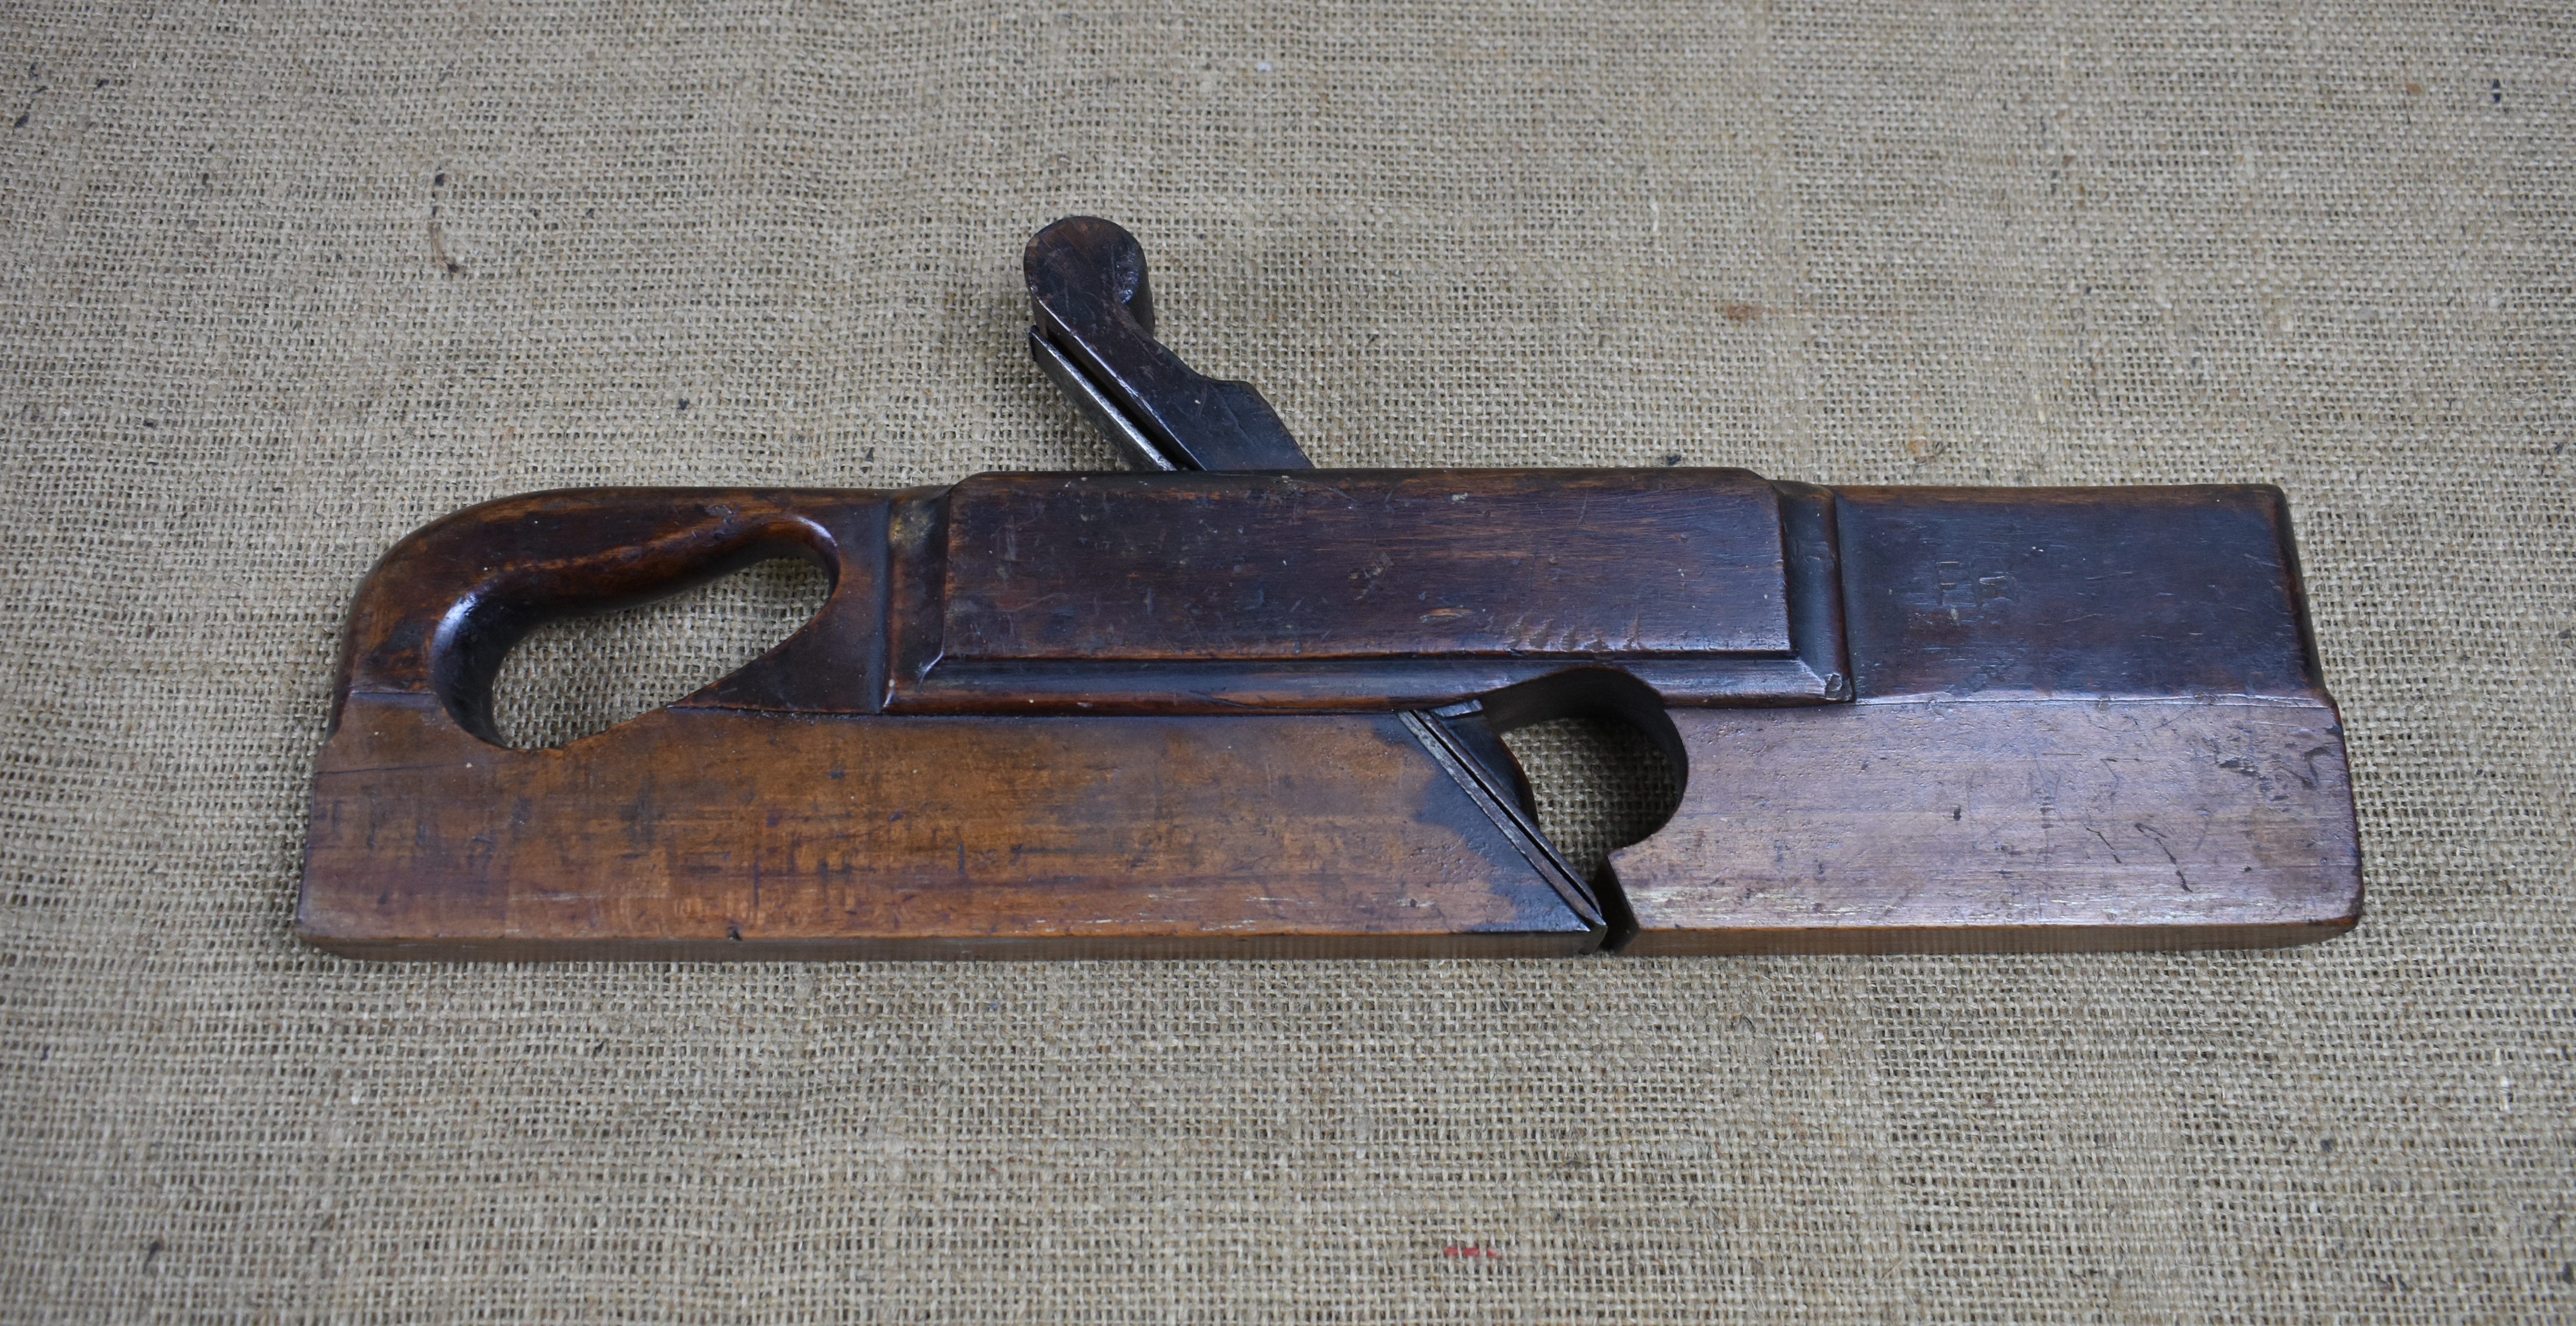 Rebate plane by S.Tomkinson with double iron